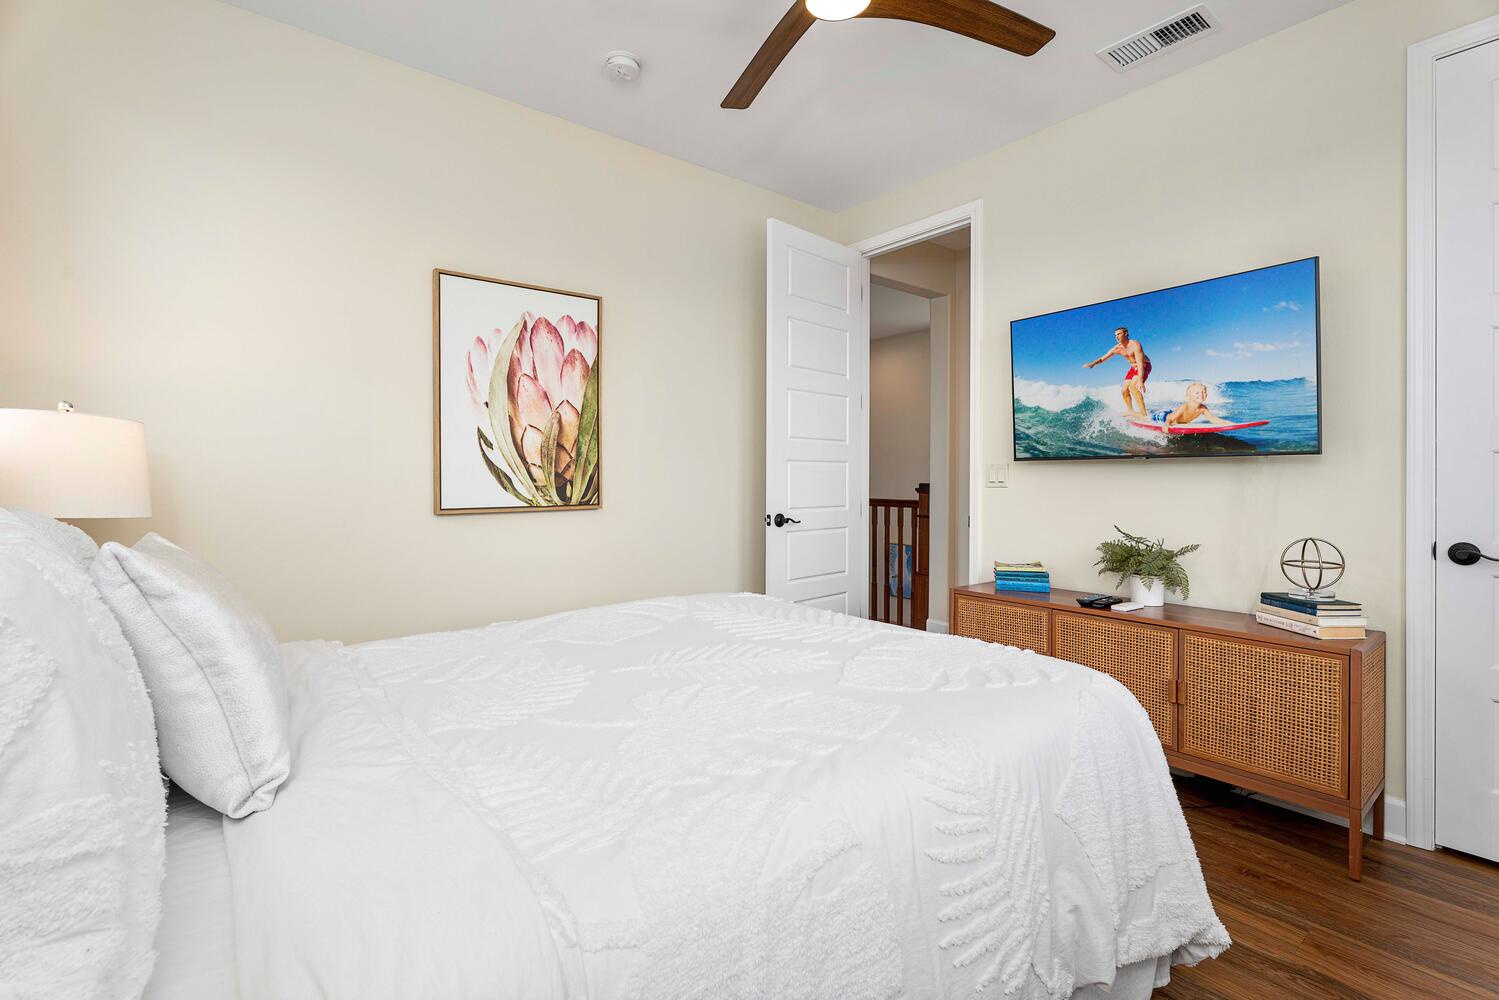 Kailua-Kona Vacation Rentals, Holua Kai #26 - The third guest bedroom is adorned with vibrant artwork and serene decor.